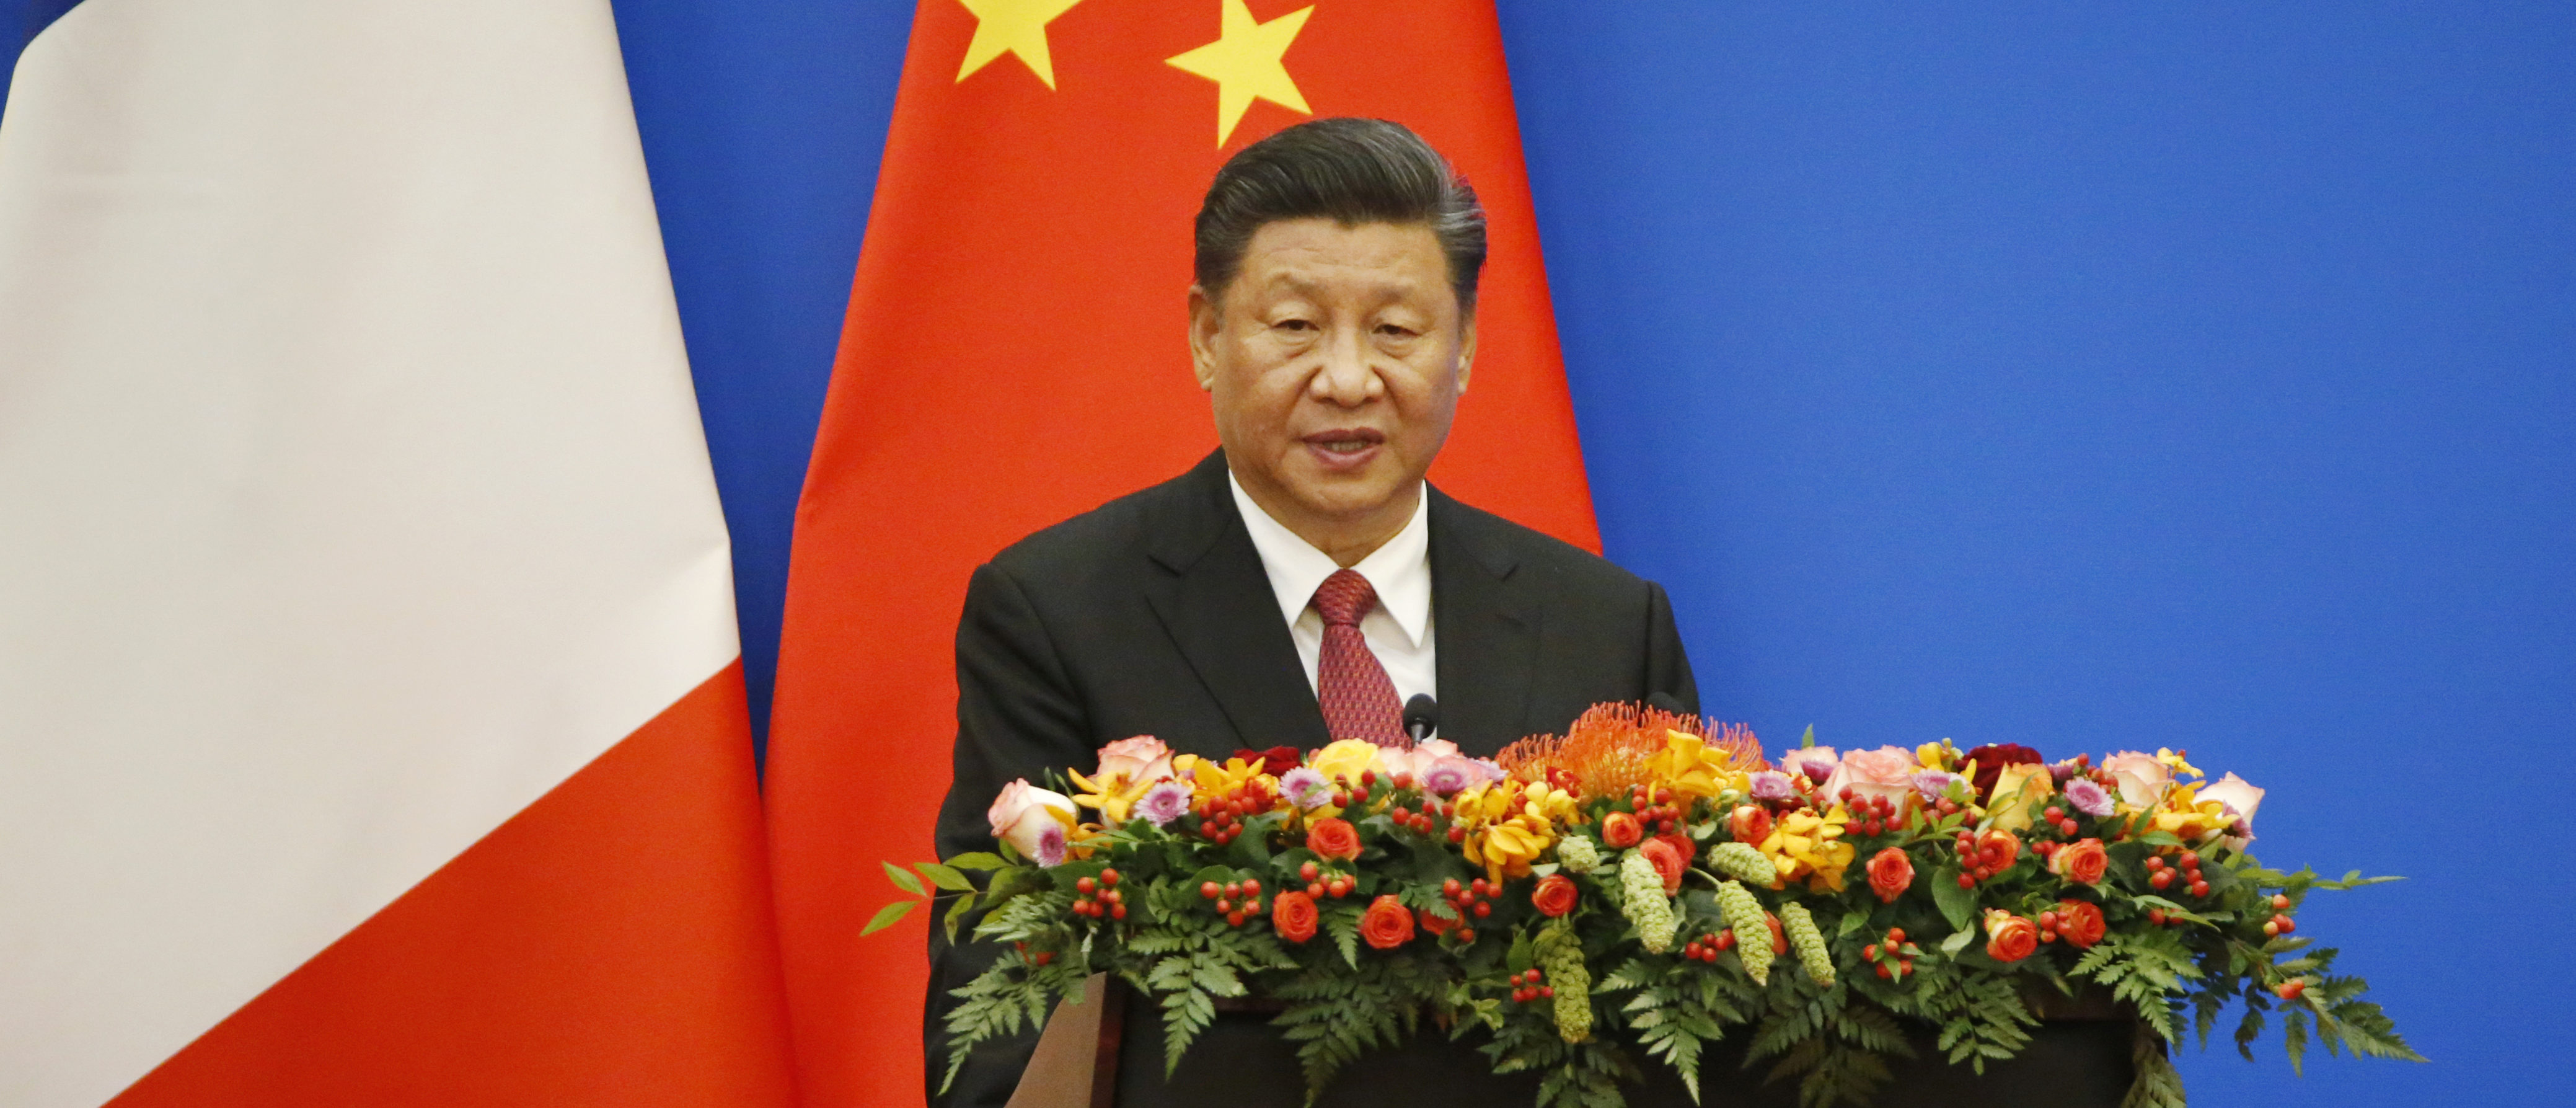 BEIJING, CHINA - NOVEMBER 6: Chinese President Xi Jinping speaks at a China-France Economic Forum at the Great Hall of the People on November 6, 2019 in Beijing, China. Macron, who is on a three-day state visit and also attended the China International Import Expo in Shanghai, said that France and China have found common ground on climate change and trade, but that Beijing needs to be more open to foreign companies, according to published reports. (Photo by Florence Lo - Pool/Getty Images)